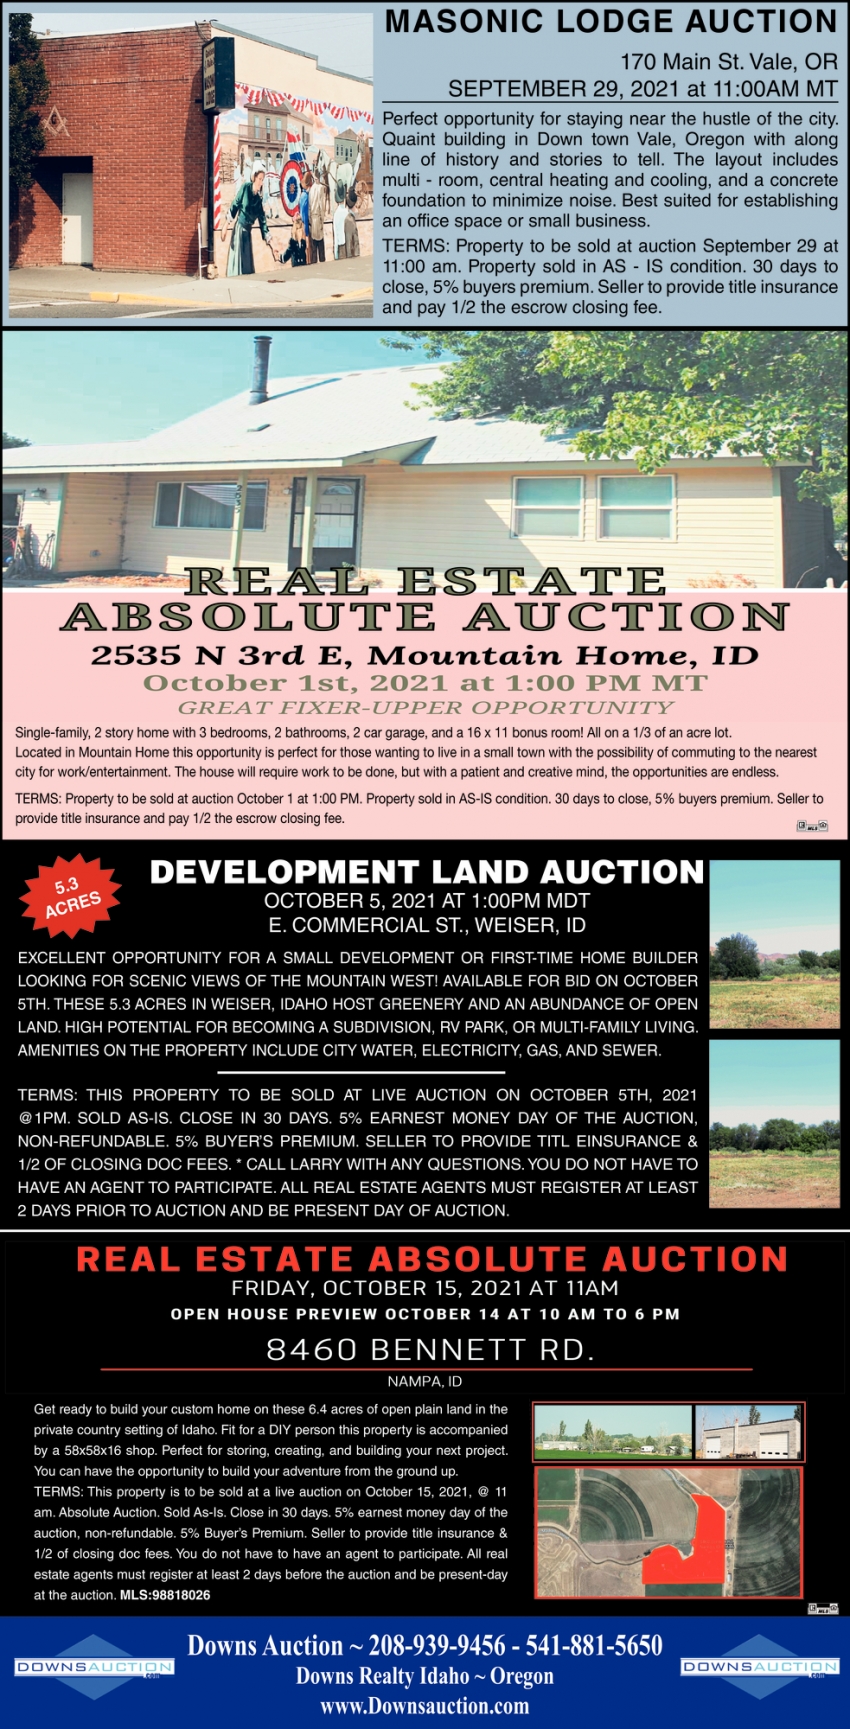 Real Estate Absolute Auction